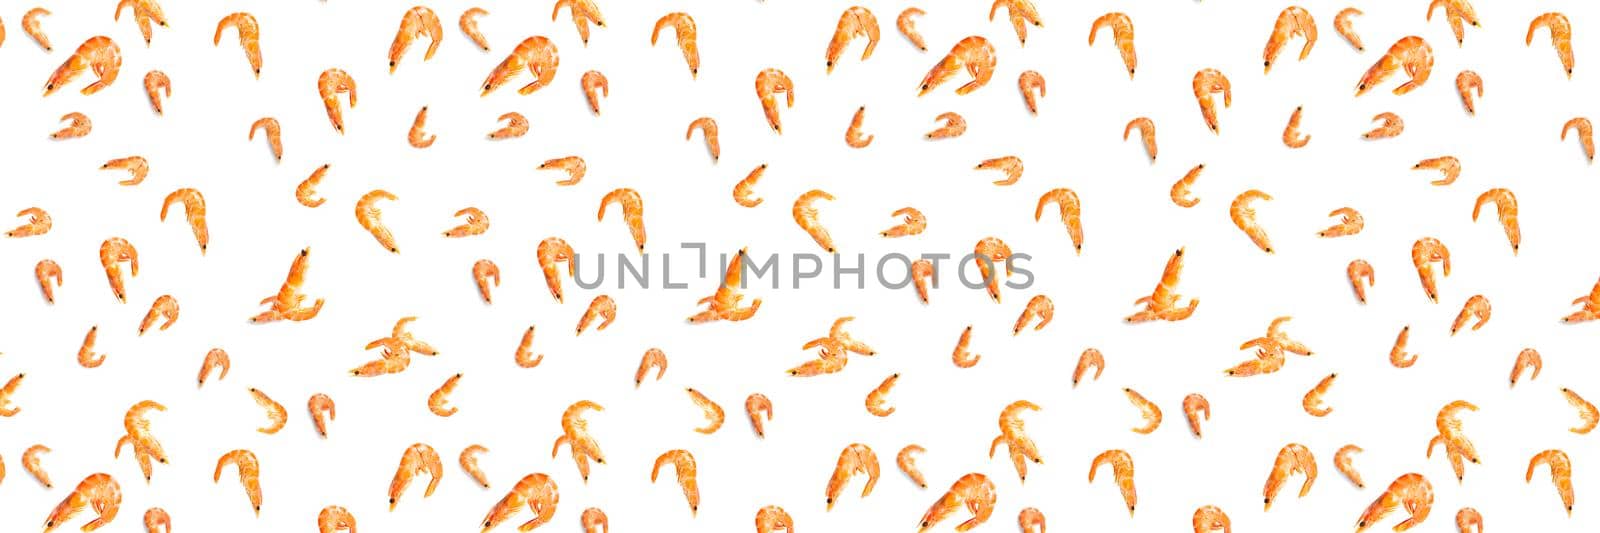 Tiger shrimp. Seafood background made from Prawns isolated on a white backdrop. modern background from boiled shrimps, Seafood. not seamless pattern by PhotoTime